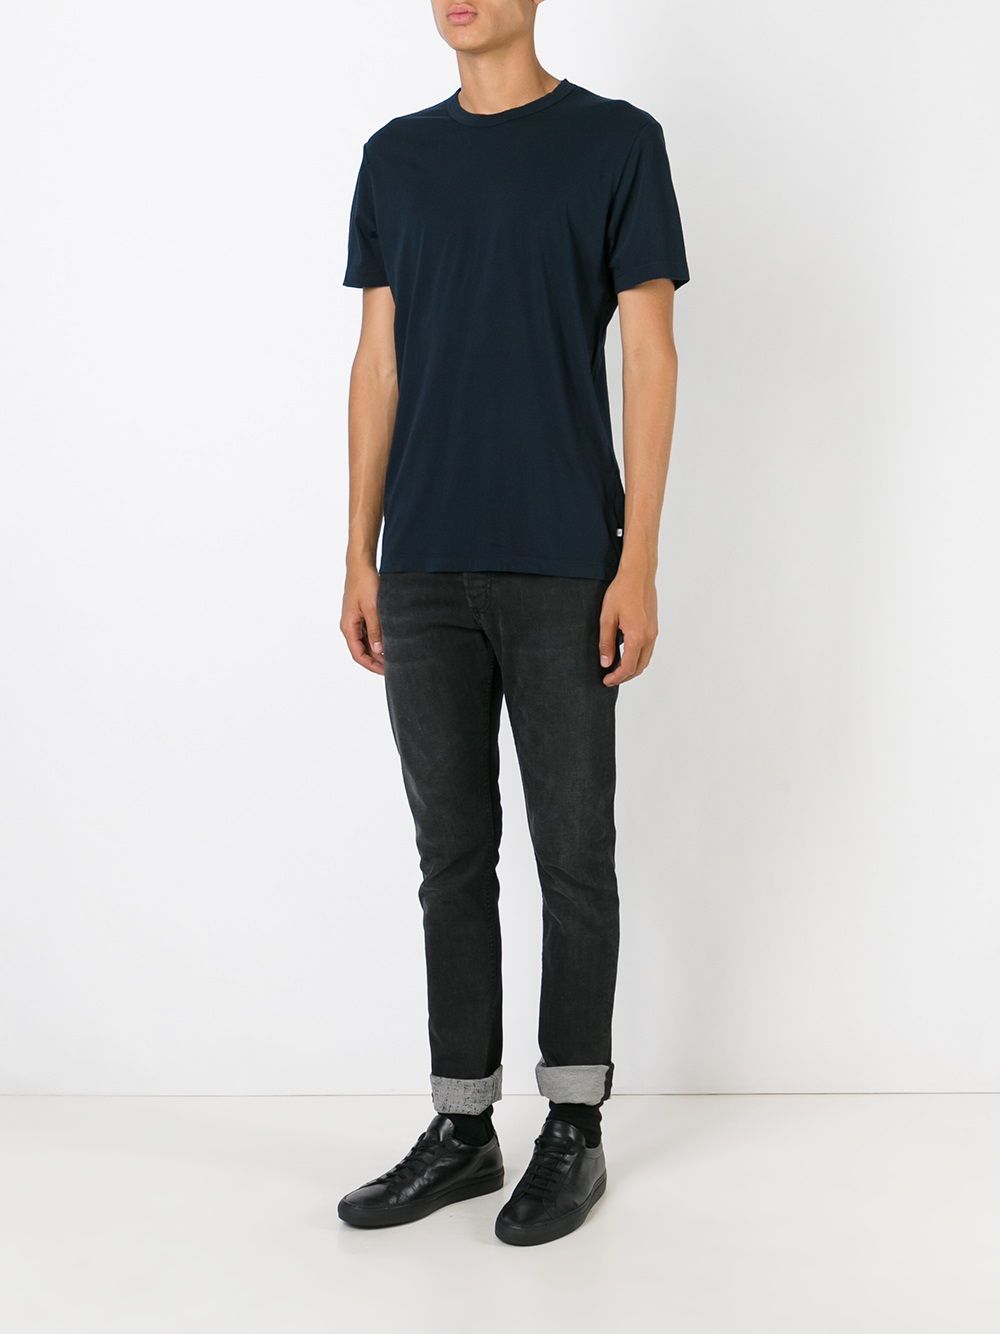 Shop James Perse round neck T-shirt with Express Delivery - FARFETCH